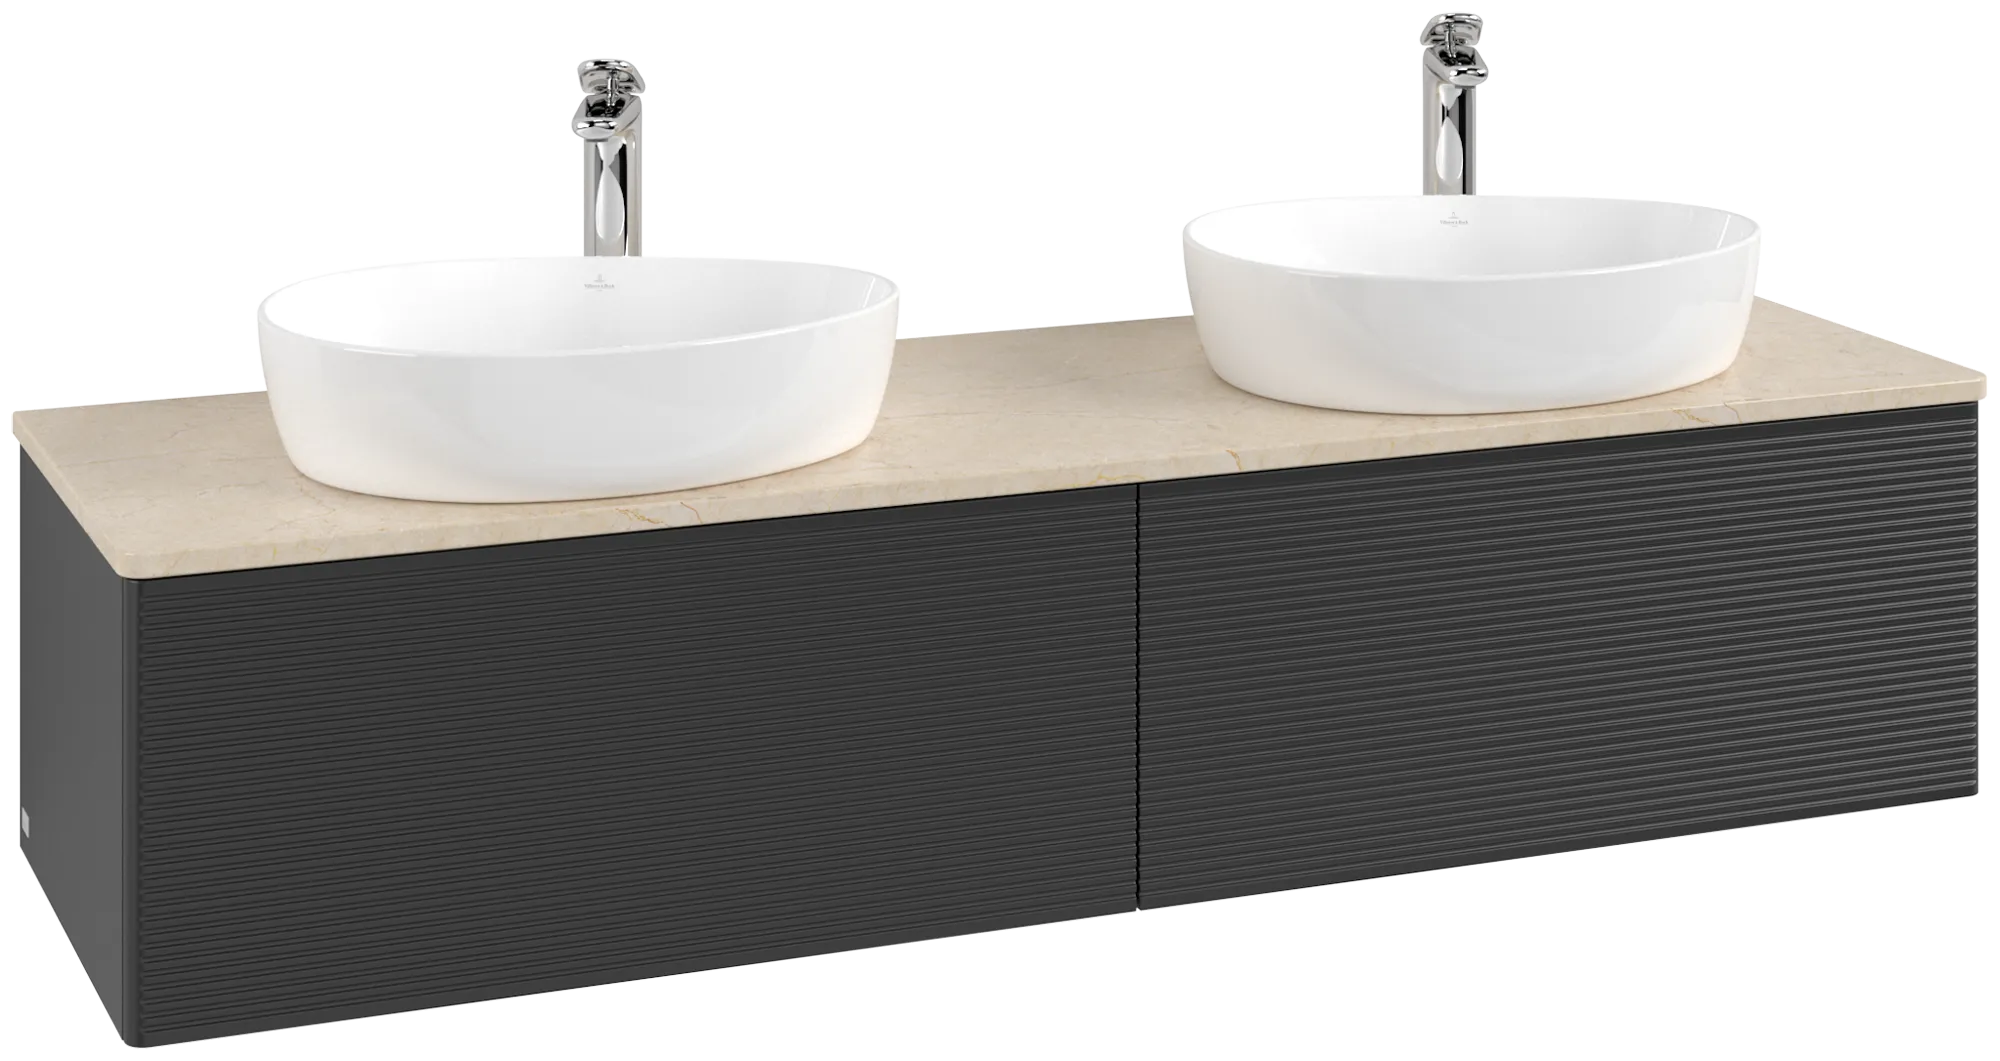 VILLEROY BOCH Antao Vanity unit, 2 pull-out compartments, 1600 x 360 x 500 mm, Front with grain texture, Black Matt Lacquer / Botticino #K39153PD resmi